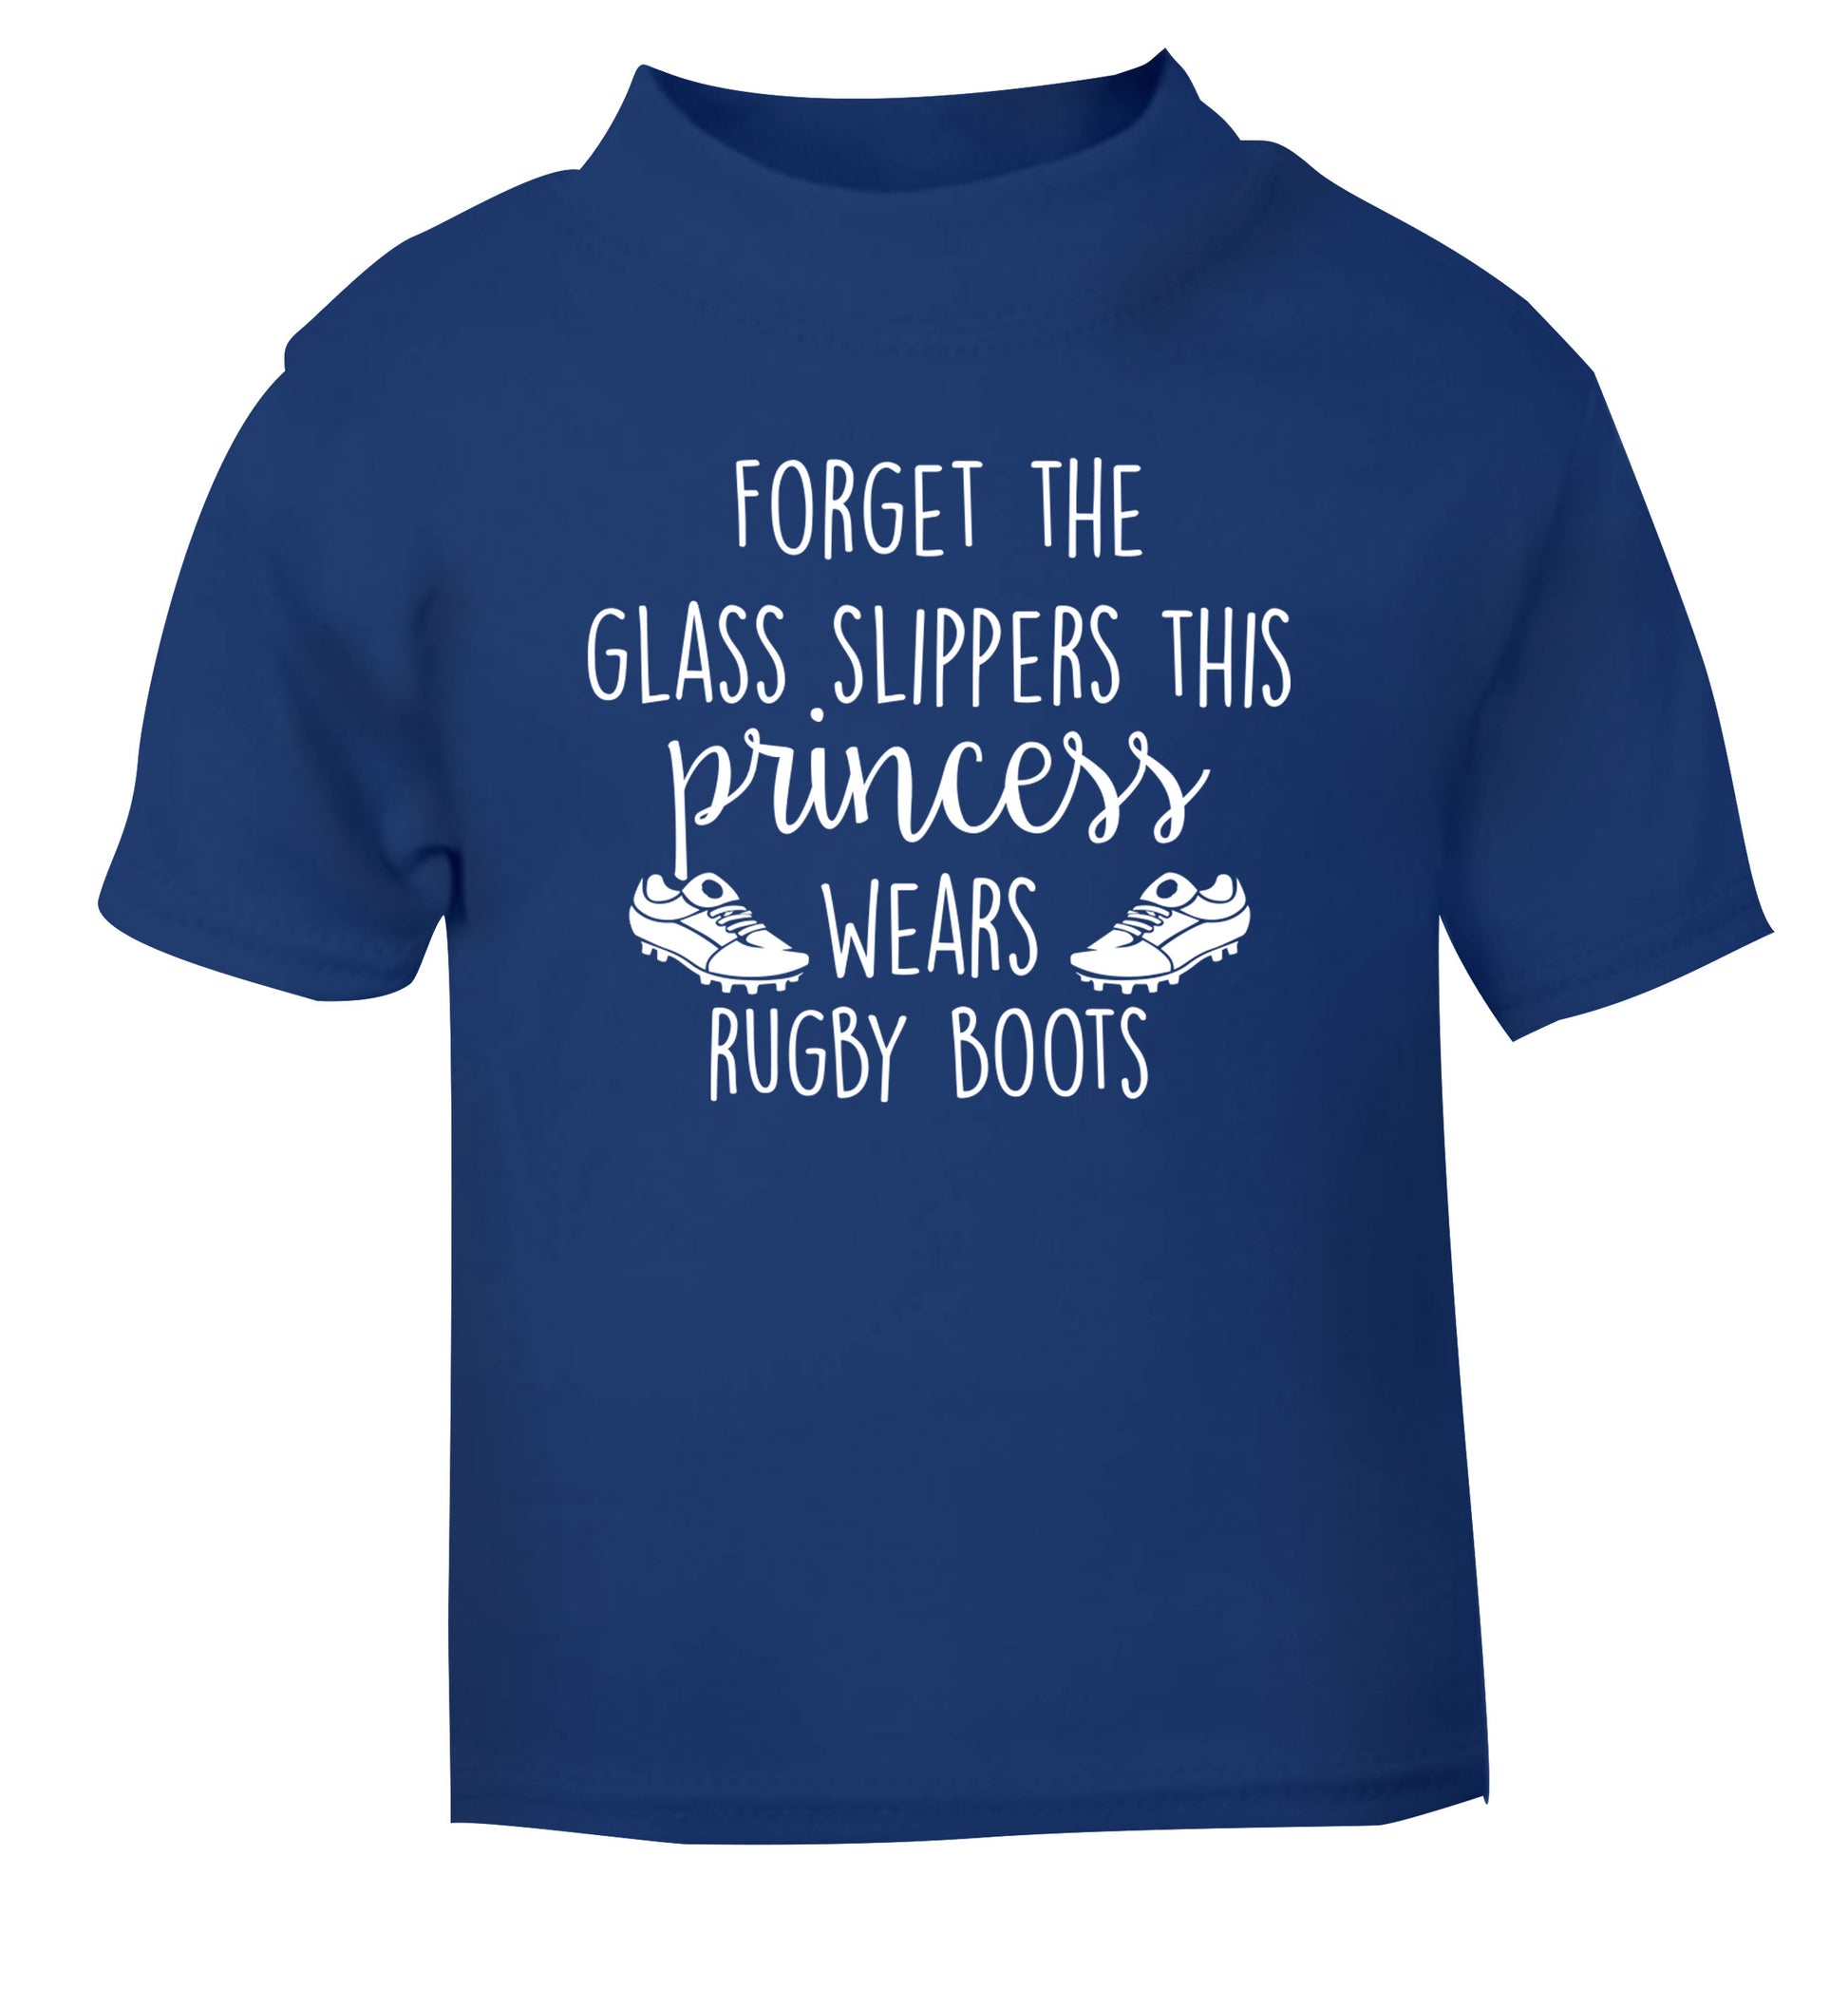 Forget the glass slippers this princess wears rugby boots blue Baby Toddler Tshirt 2 Years